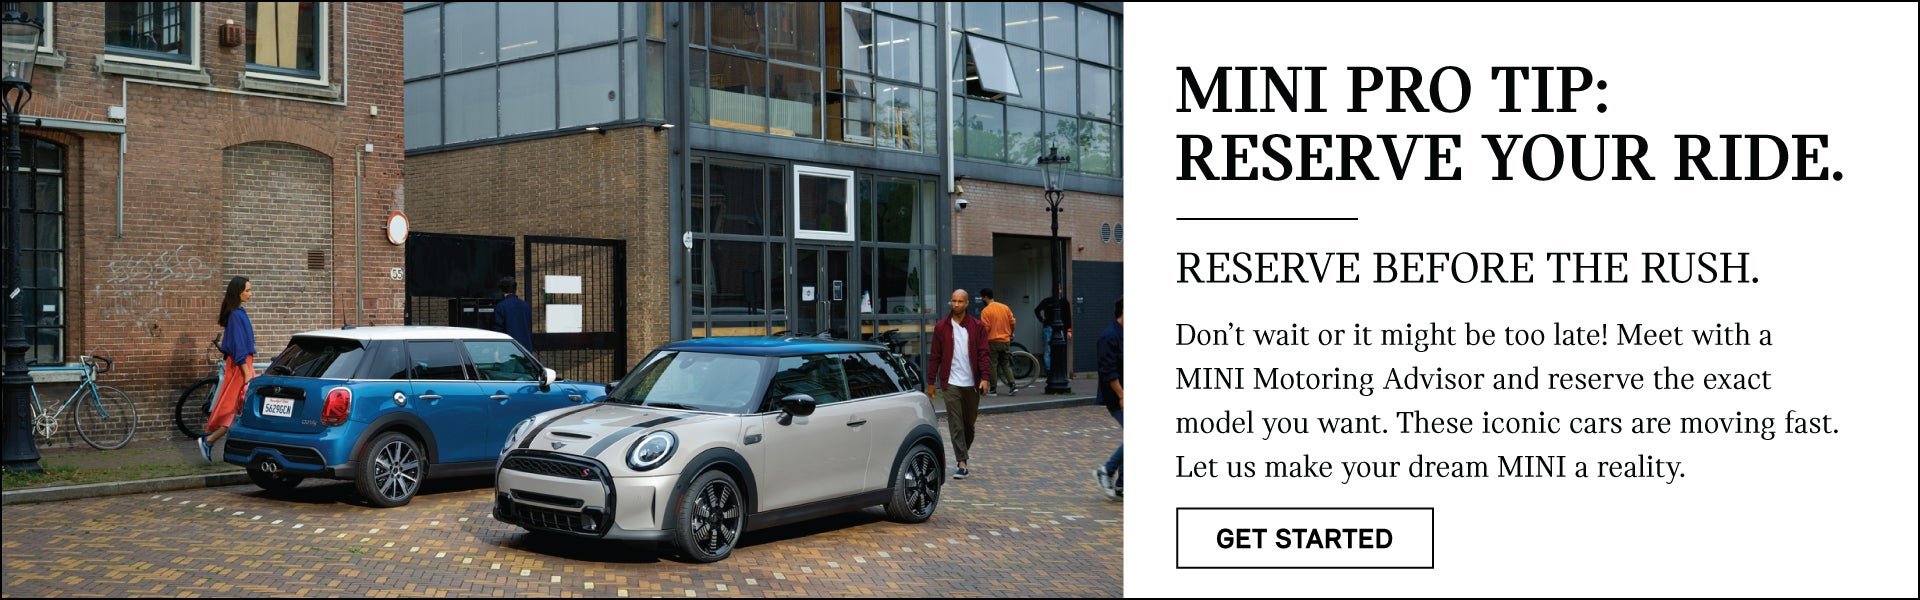 RESERVE YOUR MINI BEFORE THE RUSH. CLICK TO GET STARTED